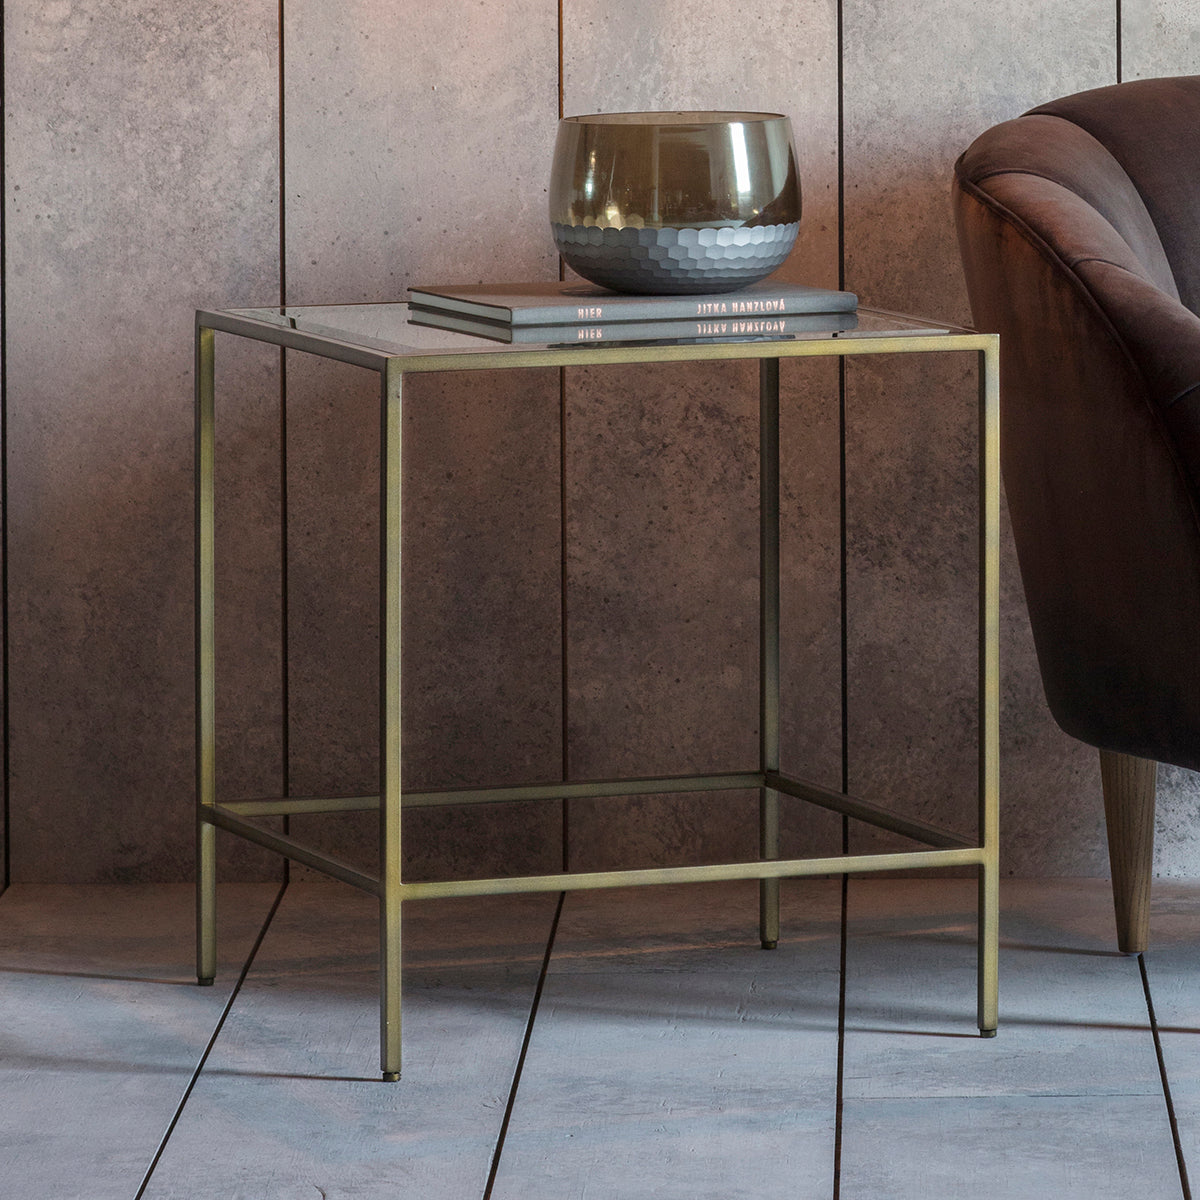 A bronze Engleborne side table with glass top, perfect for interior decor and home furniture.